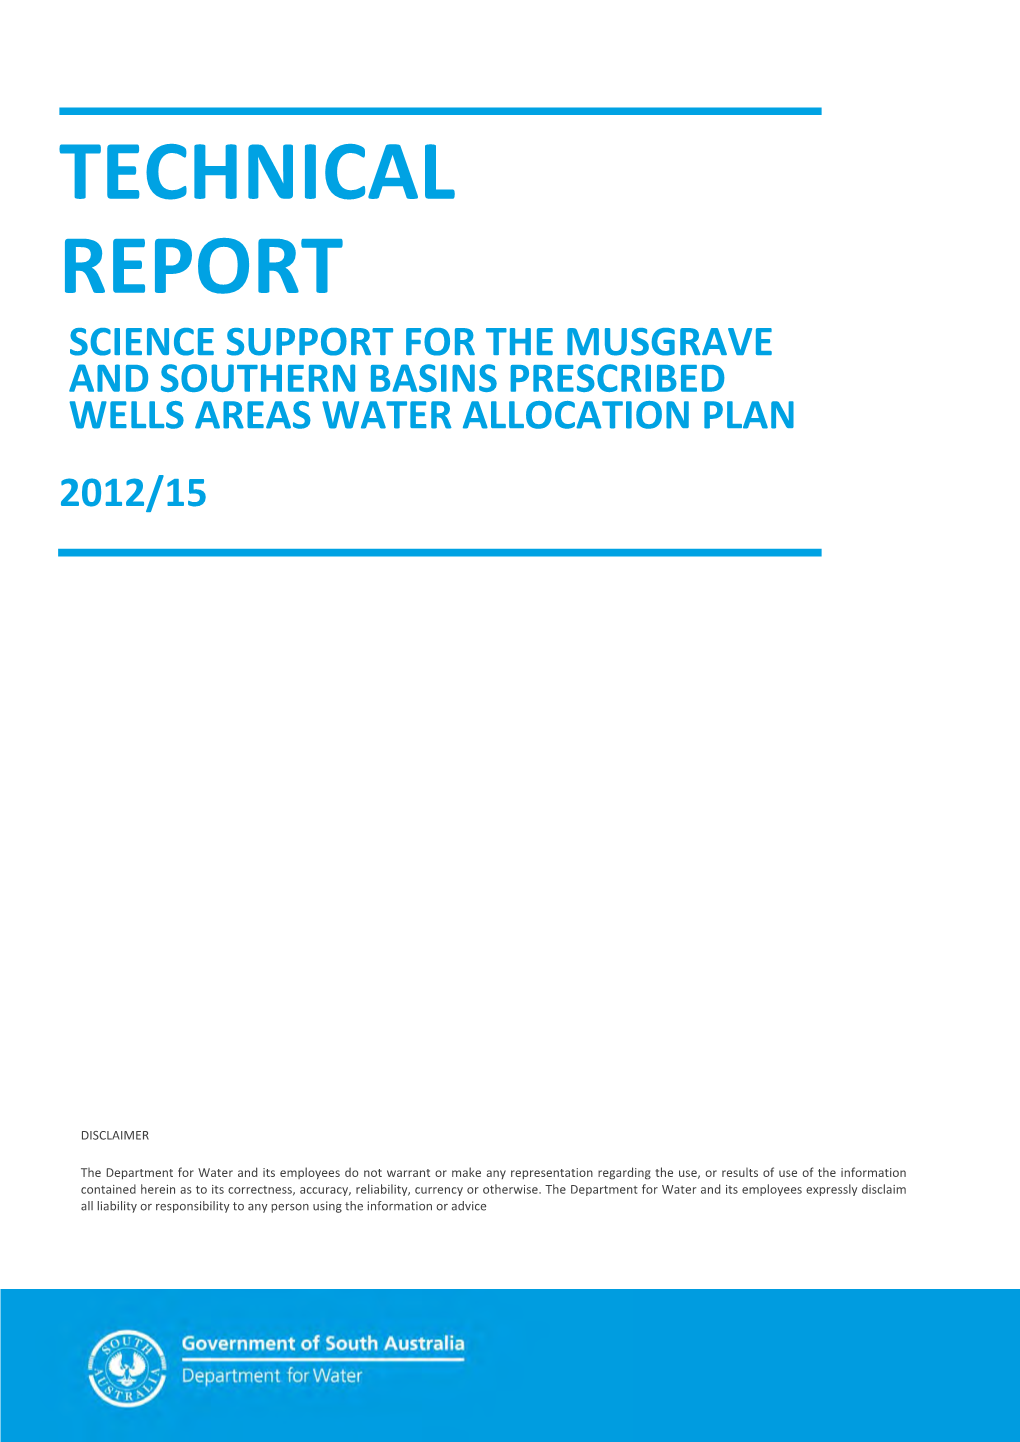 Science Support for the Musgrave and Southern Basins Prescribed Wells Areas Water Allocation Plan 2012/15